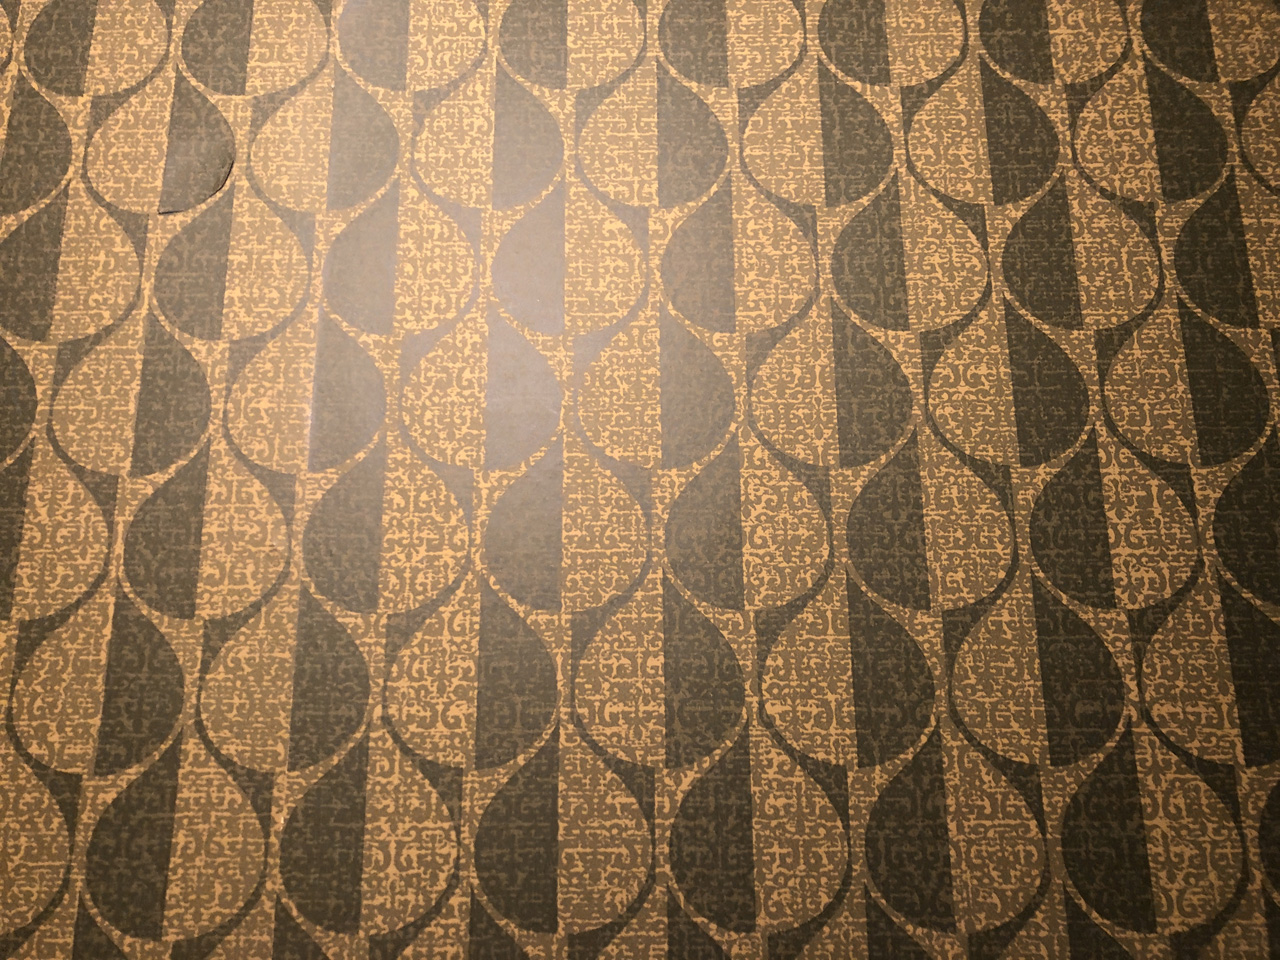 The only wallpaper in the house is in the coat closet...what a pattern!